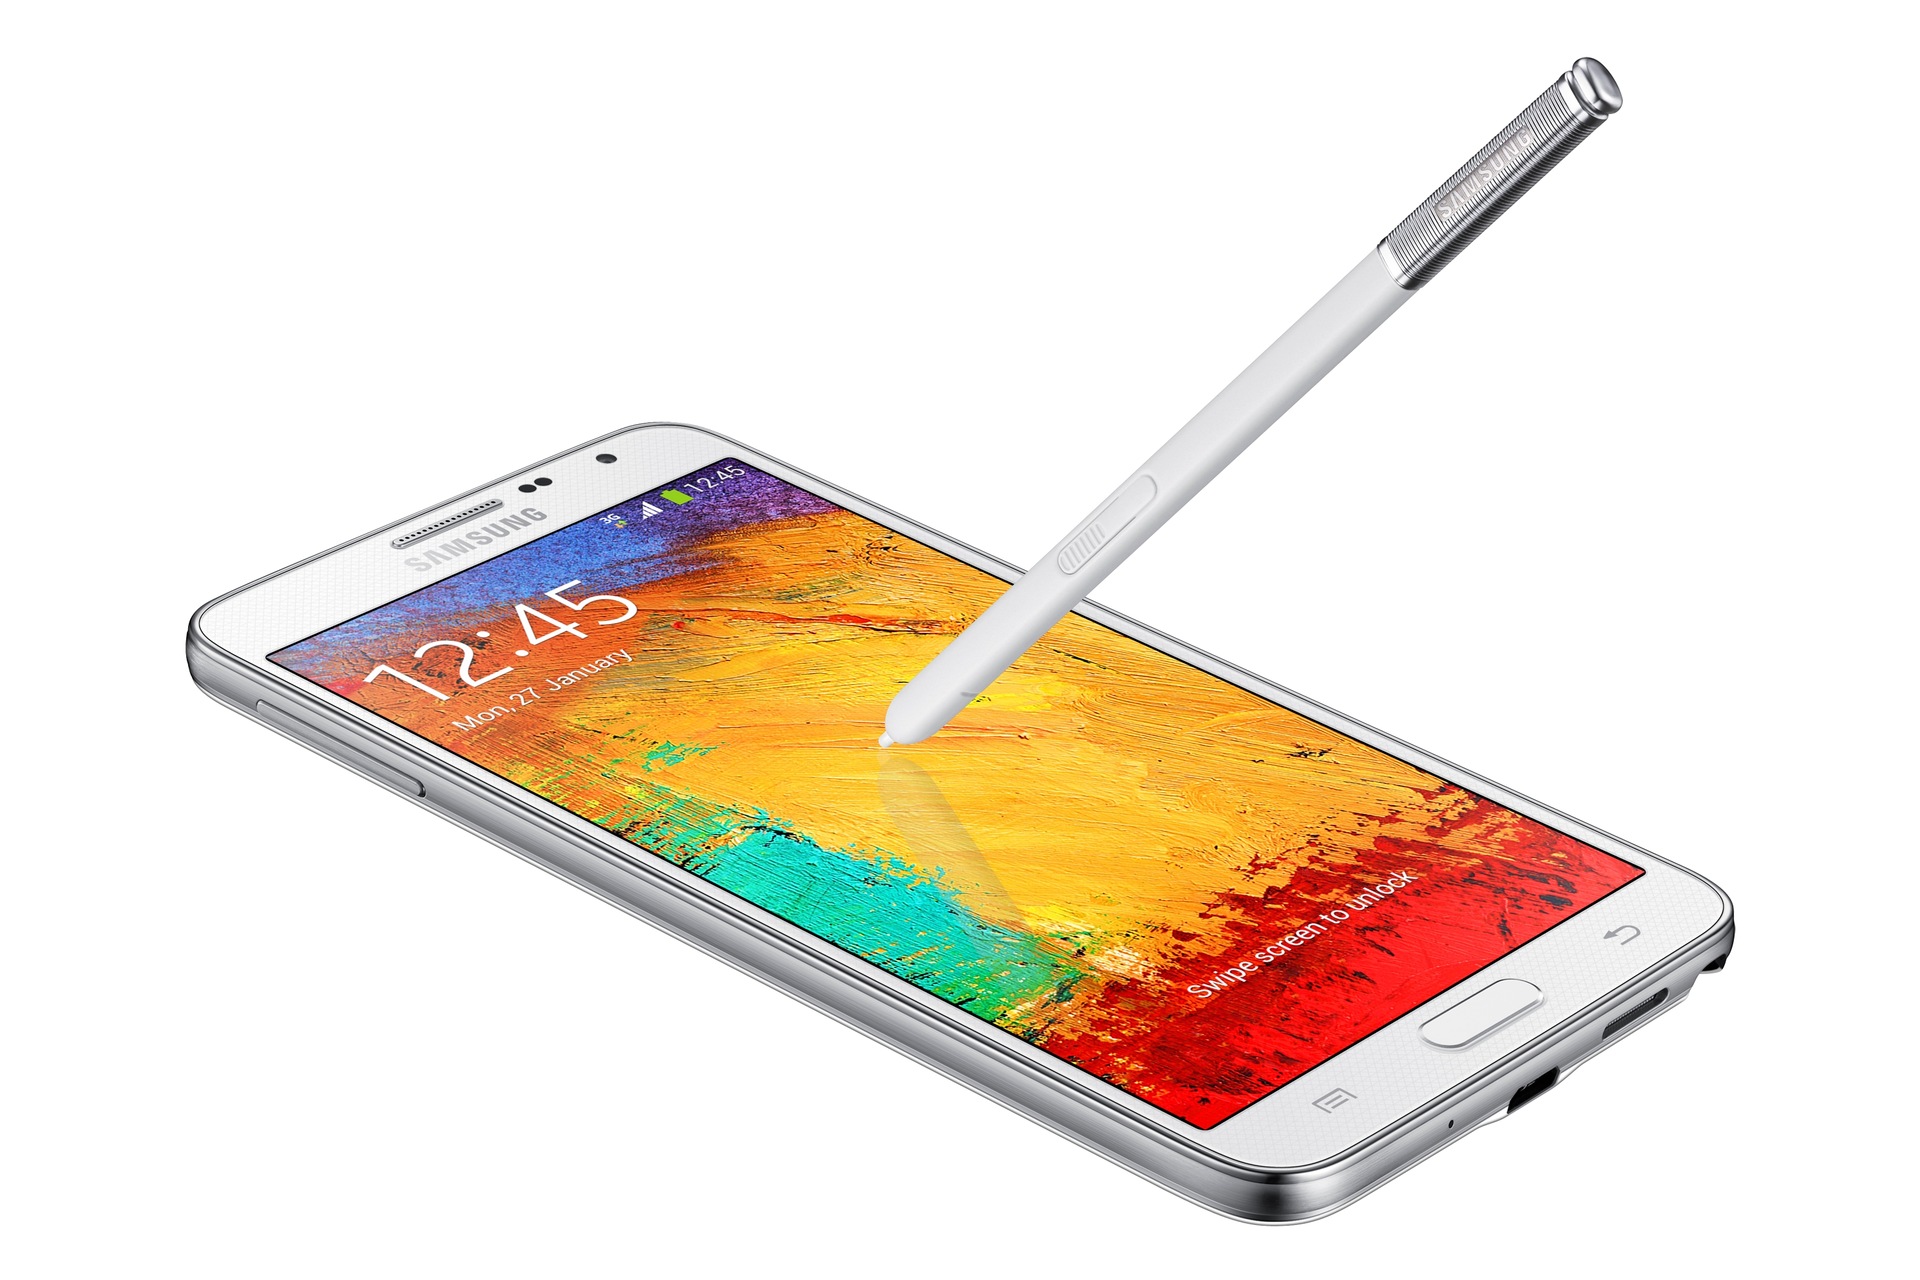 Samsung Galaxy Note 3 review - Specs, performance, price, Galaxy Gear ...